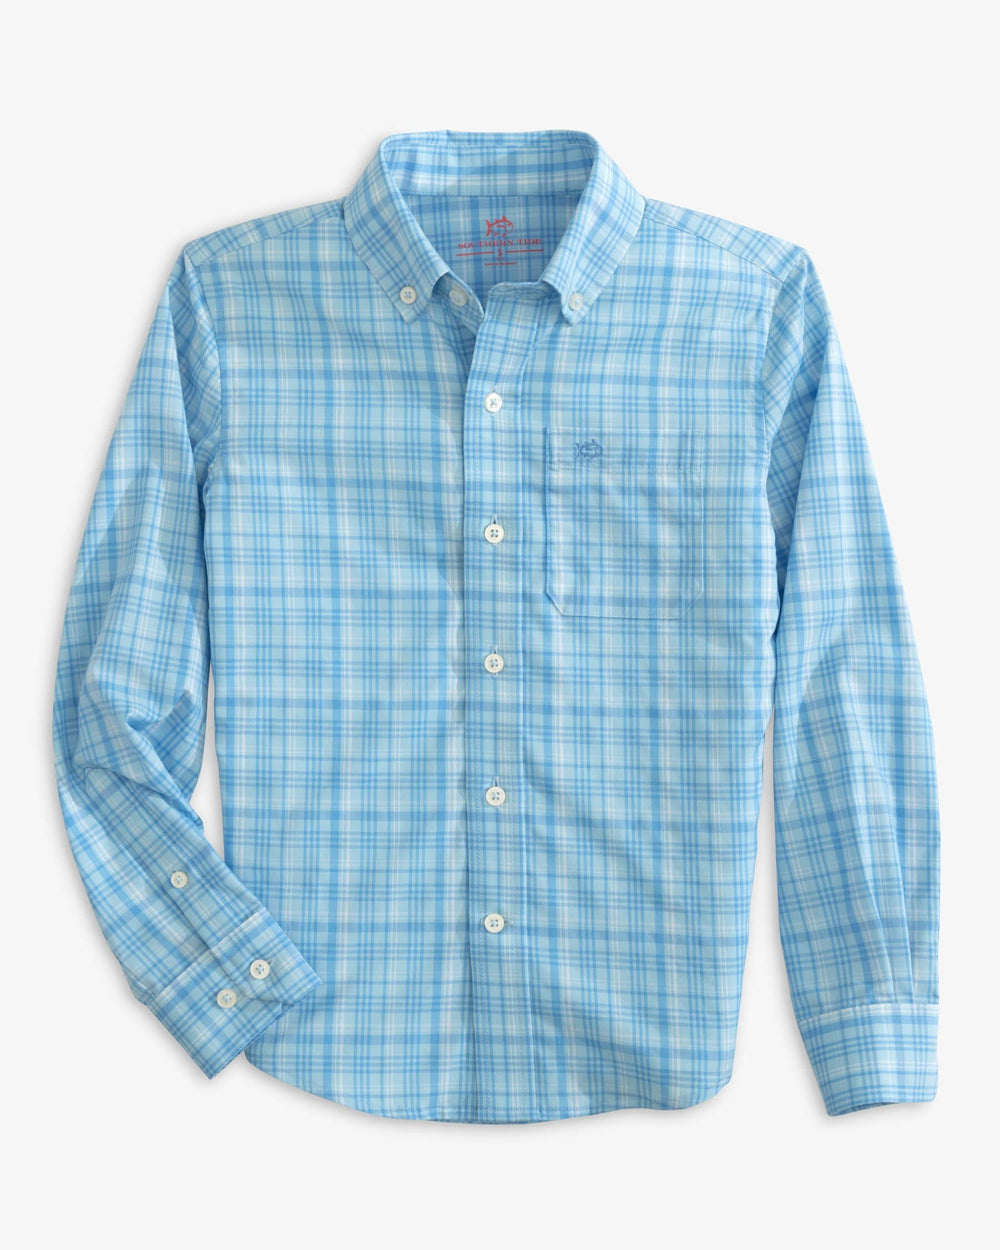 The front view of the Southern Tide Boys Keowee Plaid Intercoastal Sport Shirt by Southern Tide - Rain Water